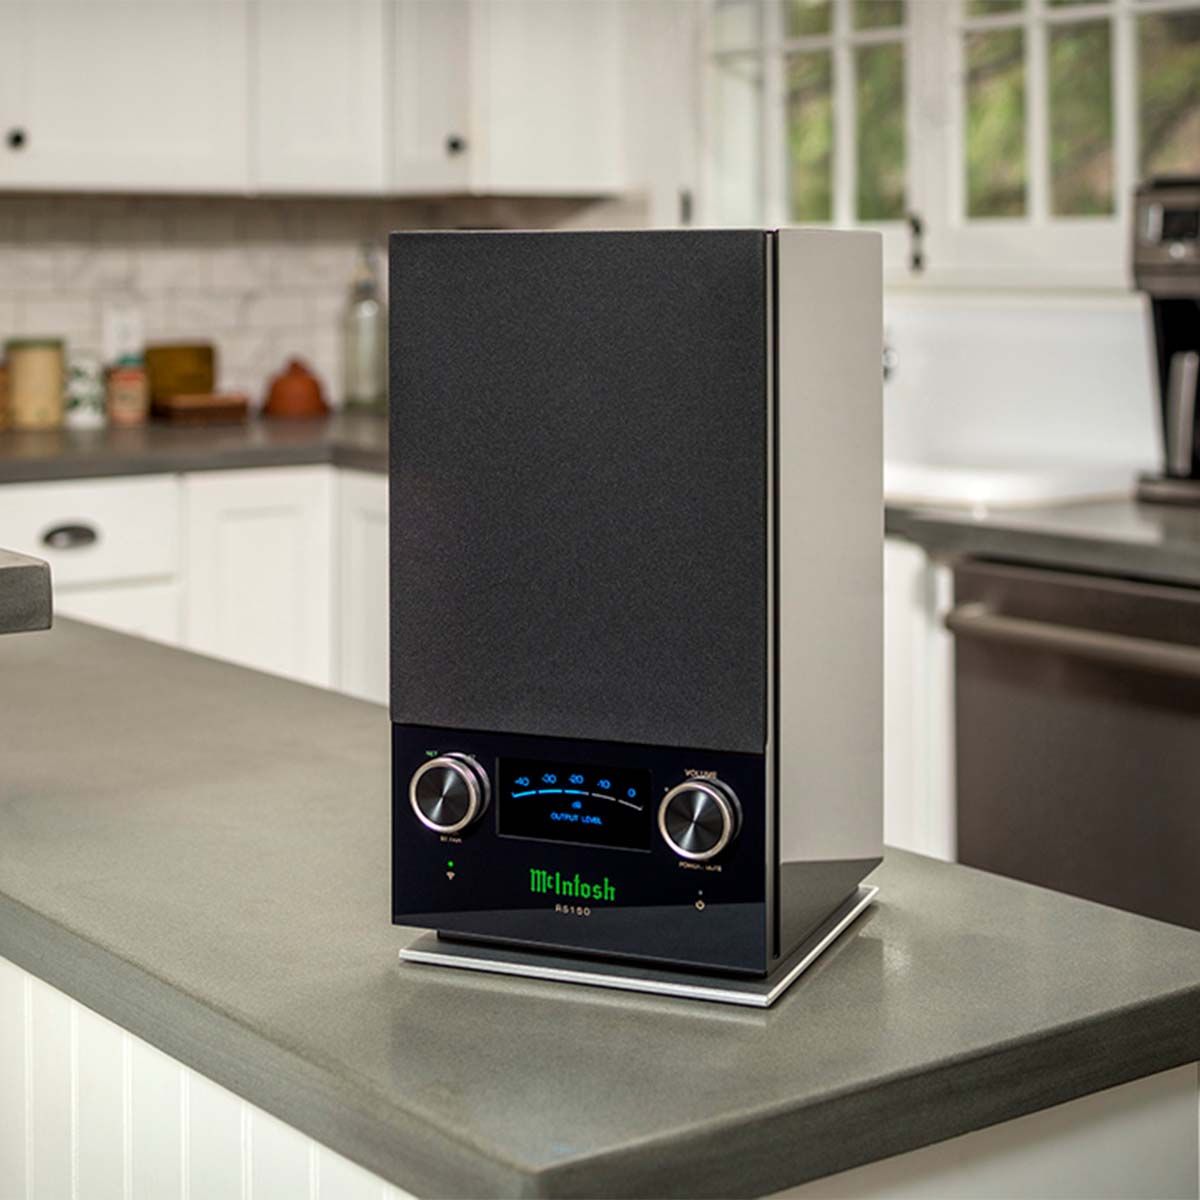 McIntosh RS150 Wireless Speaker, on a kitchen counter